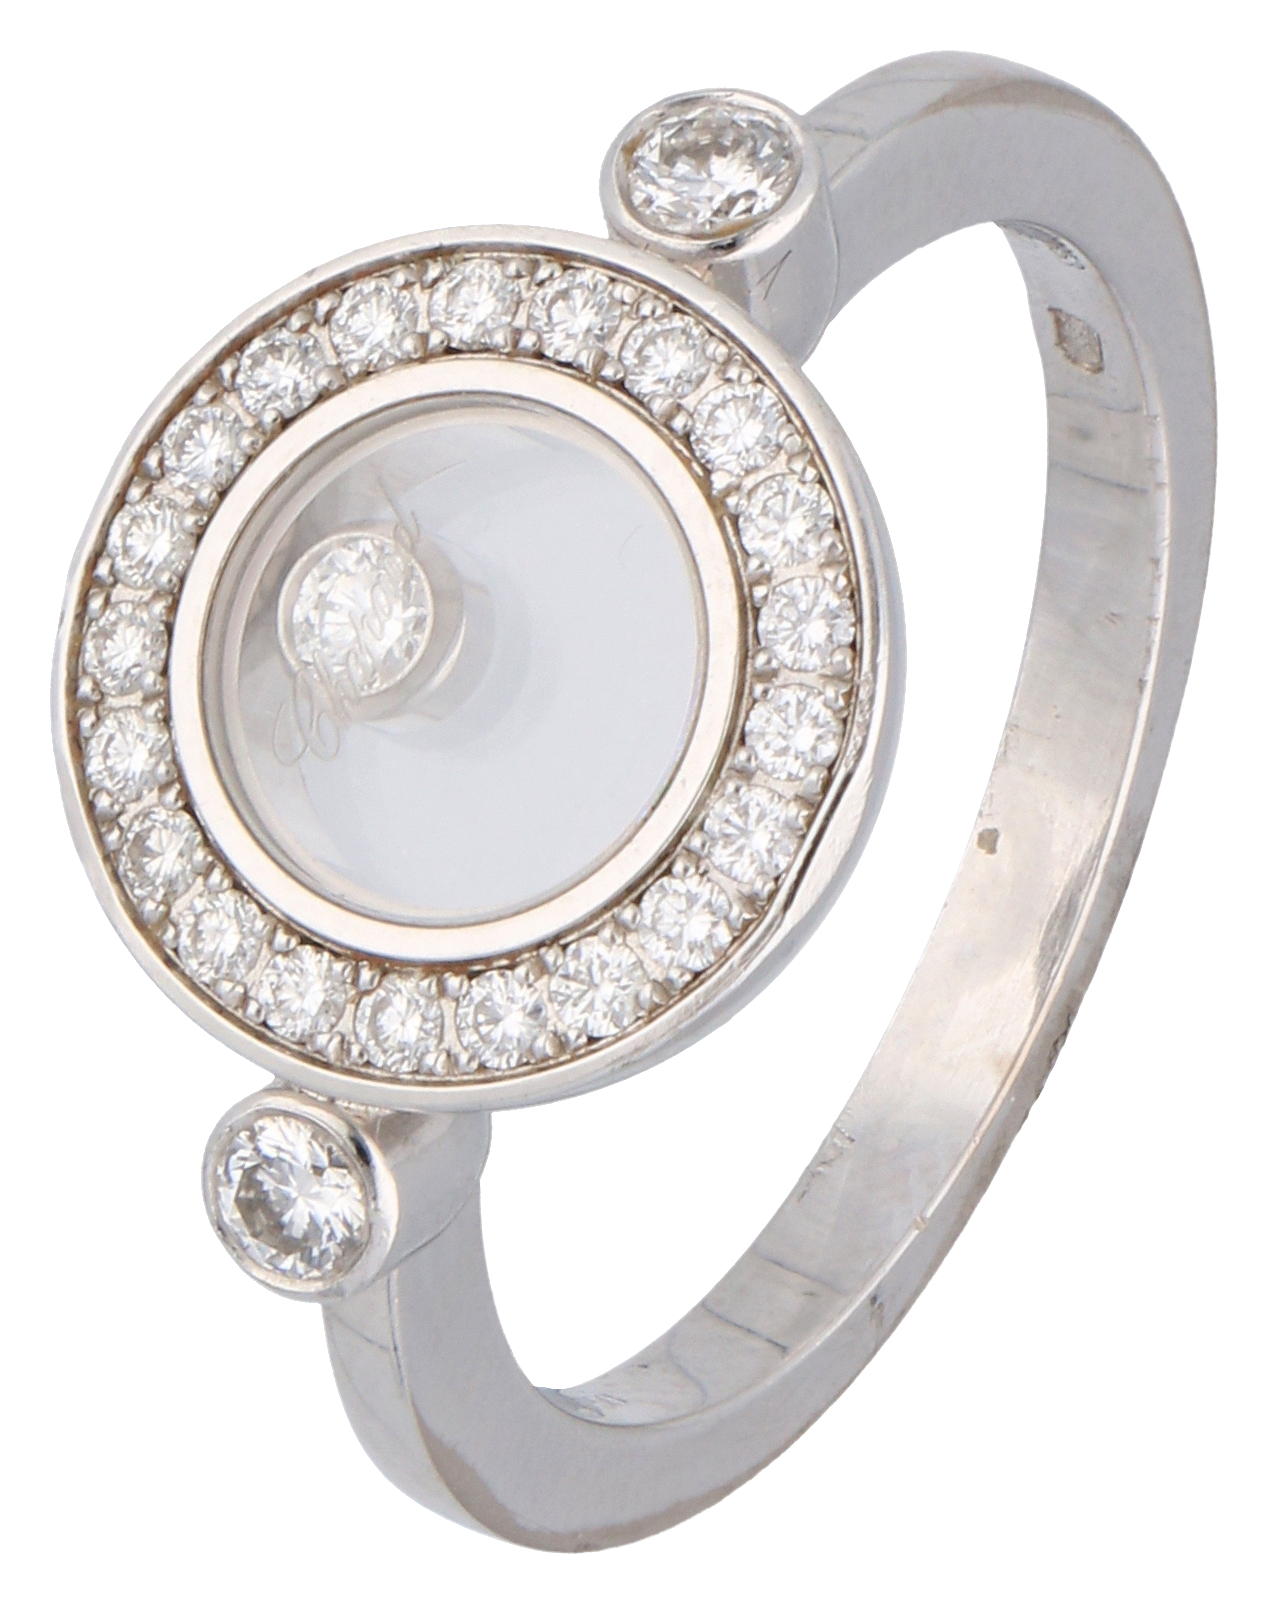 No Reserve - Chopard 18k white gold happy diamonds ring set with approx. 0.31 ct. diamond.